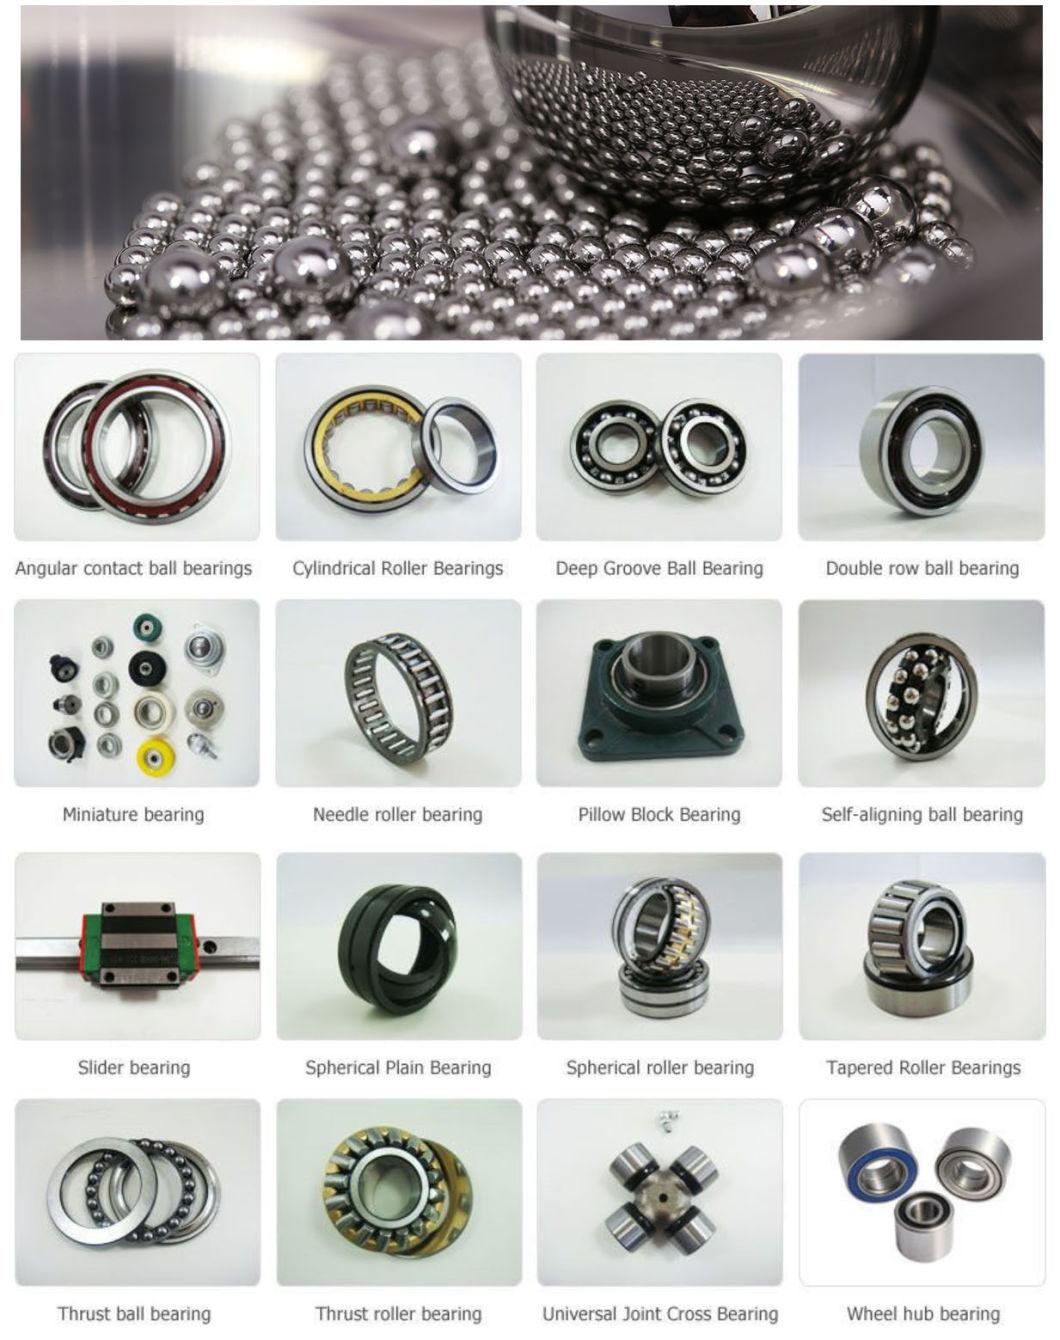 High Speed Rotation Needle Roller Bearing with Widely Use